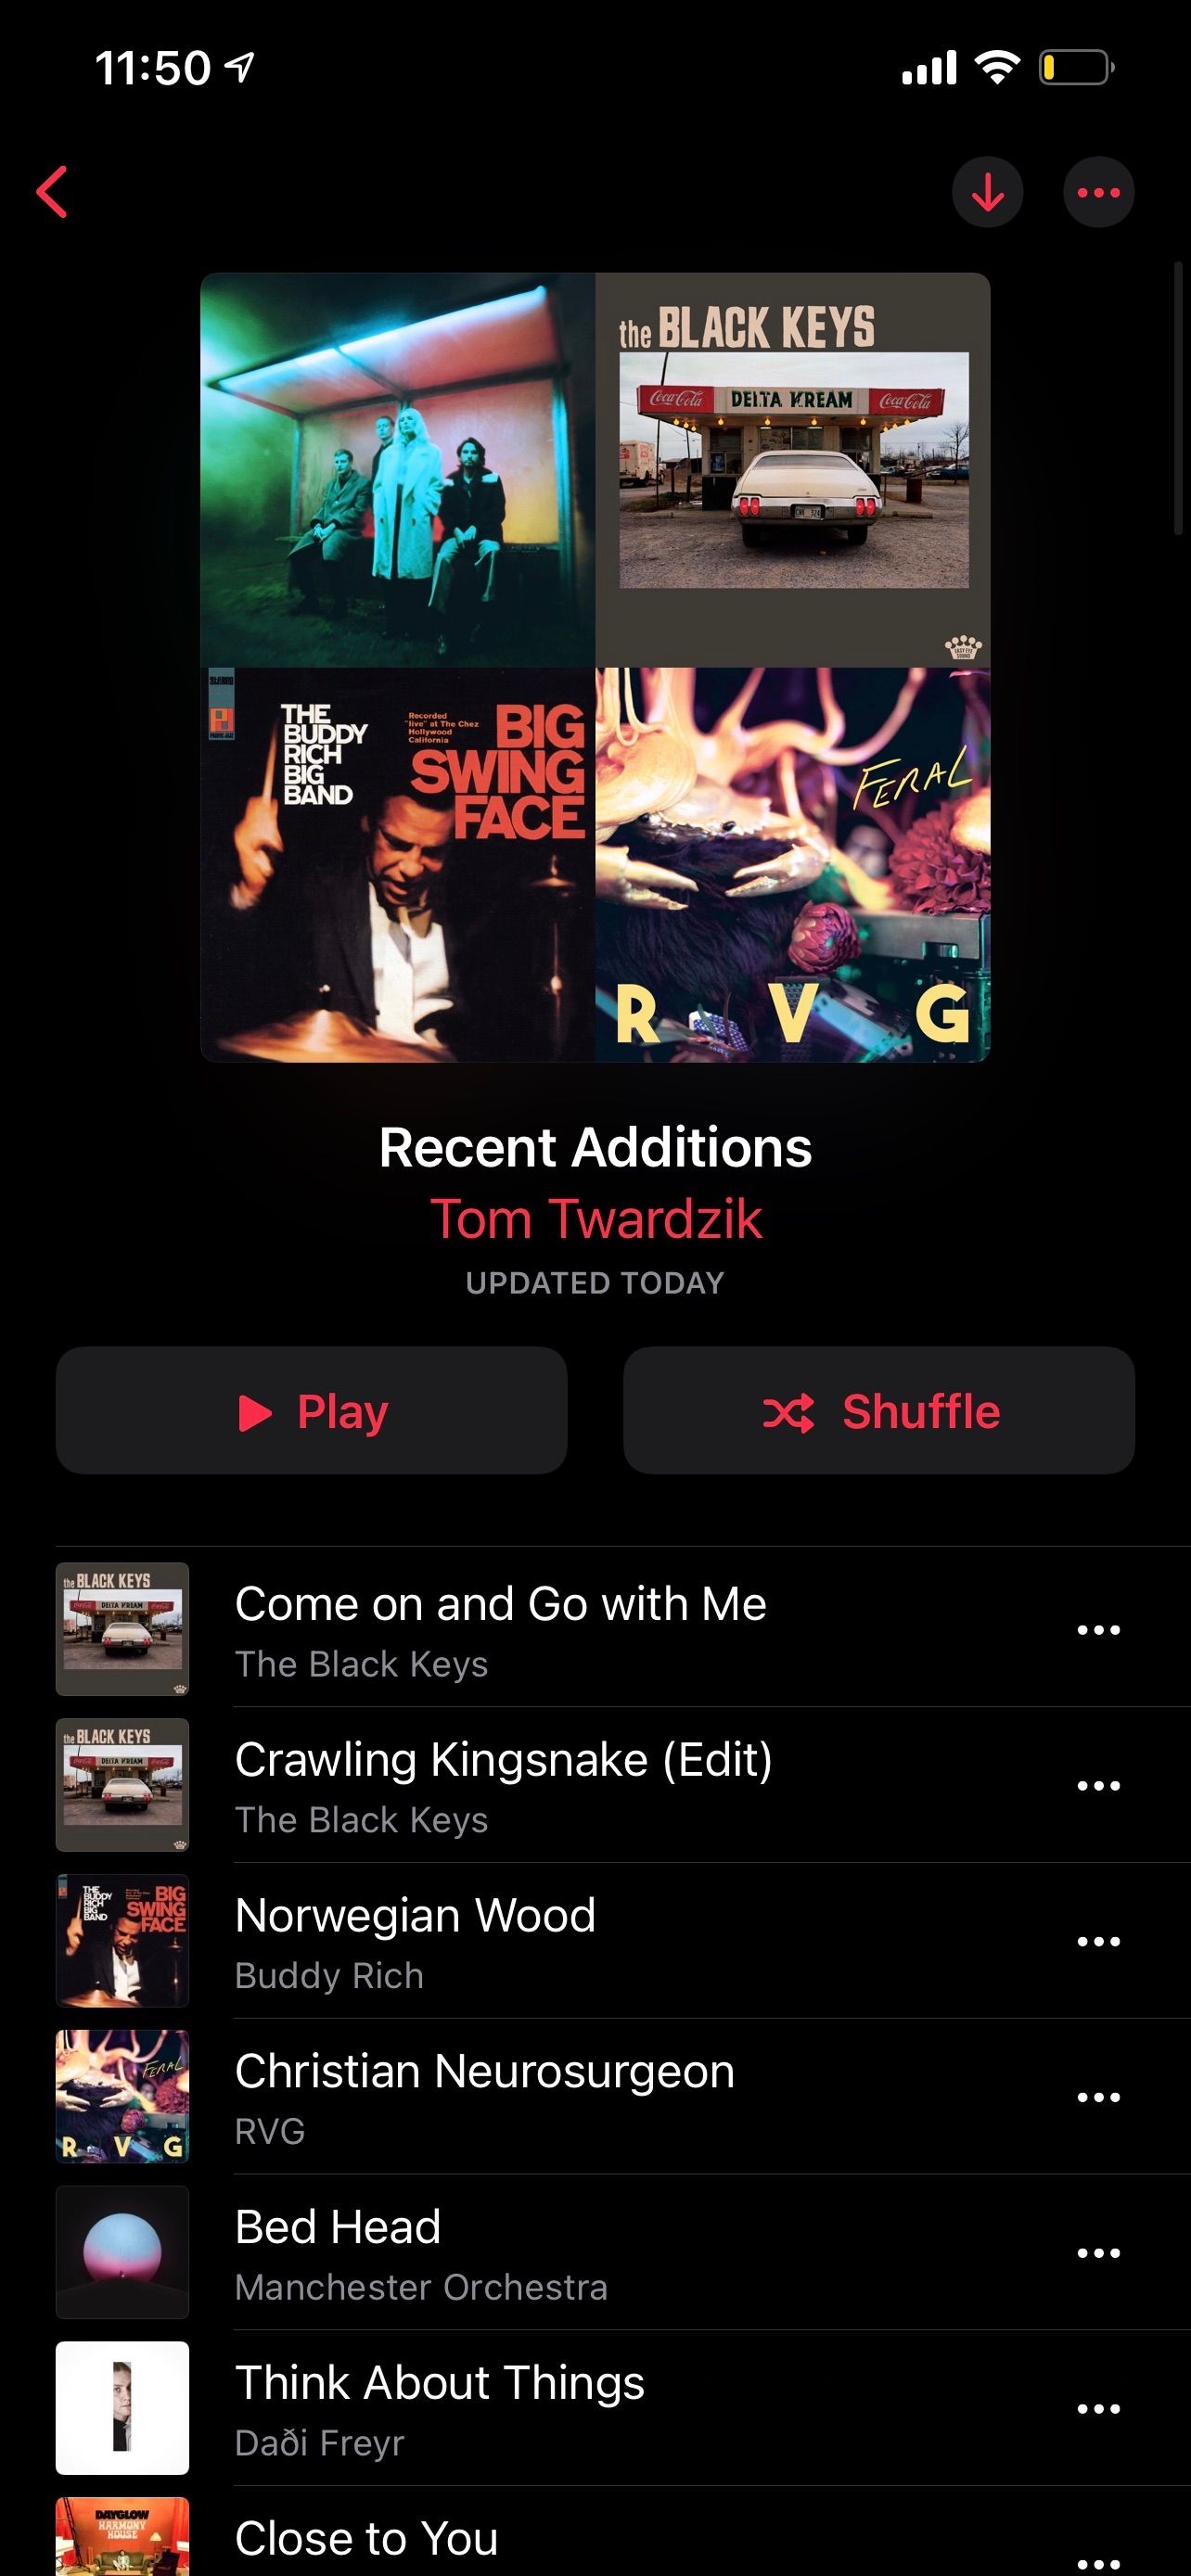 Recent additions playlist in Music app